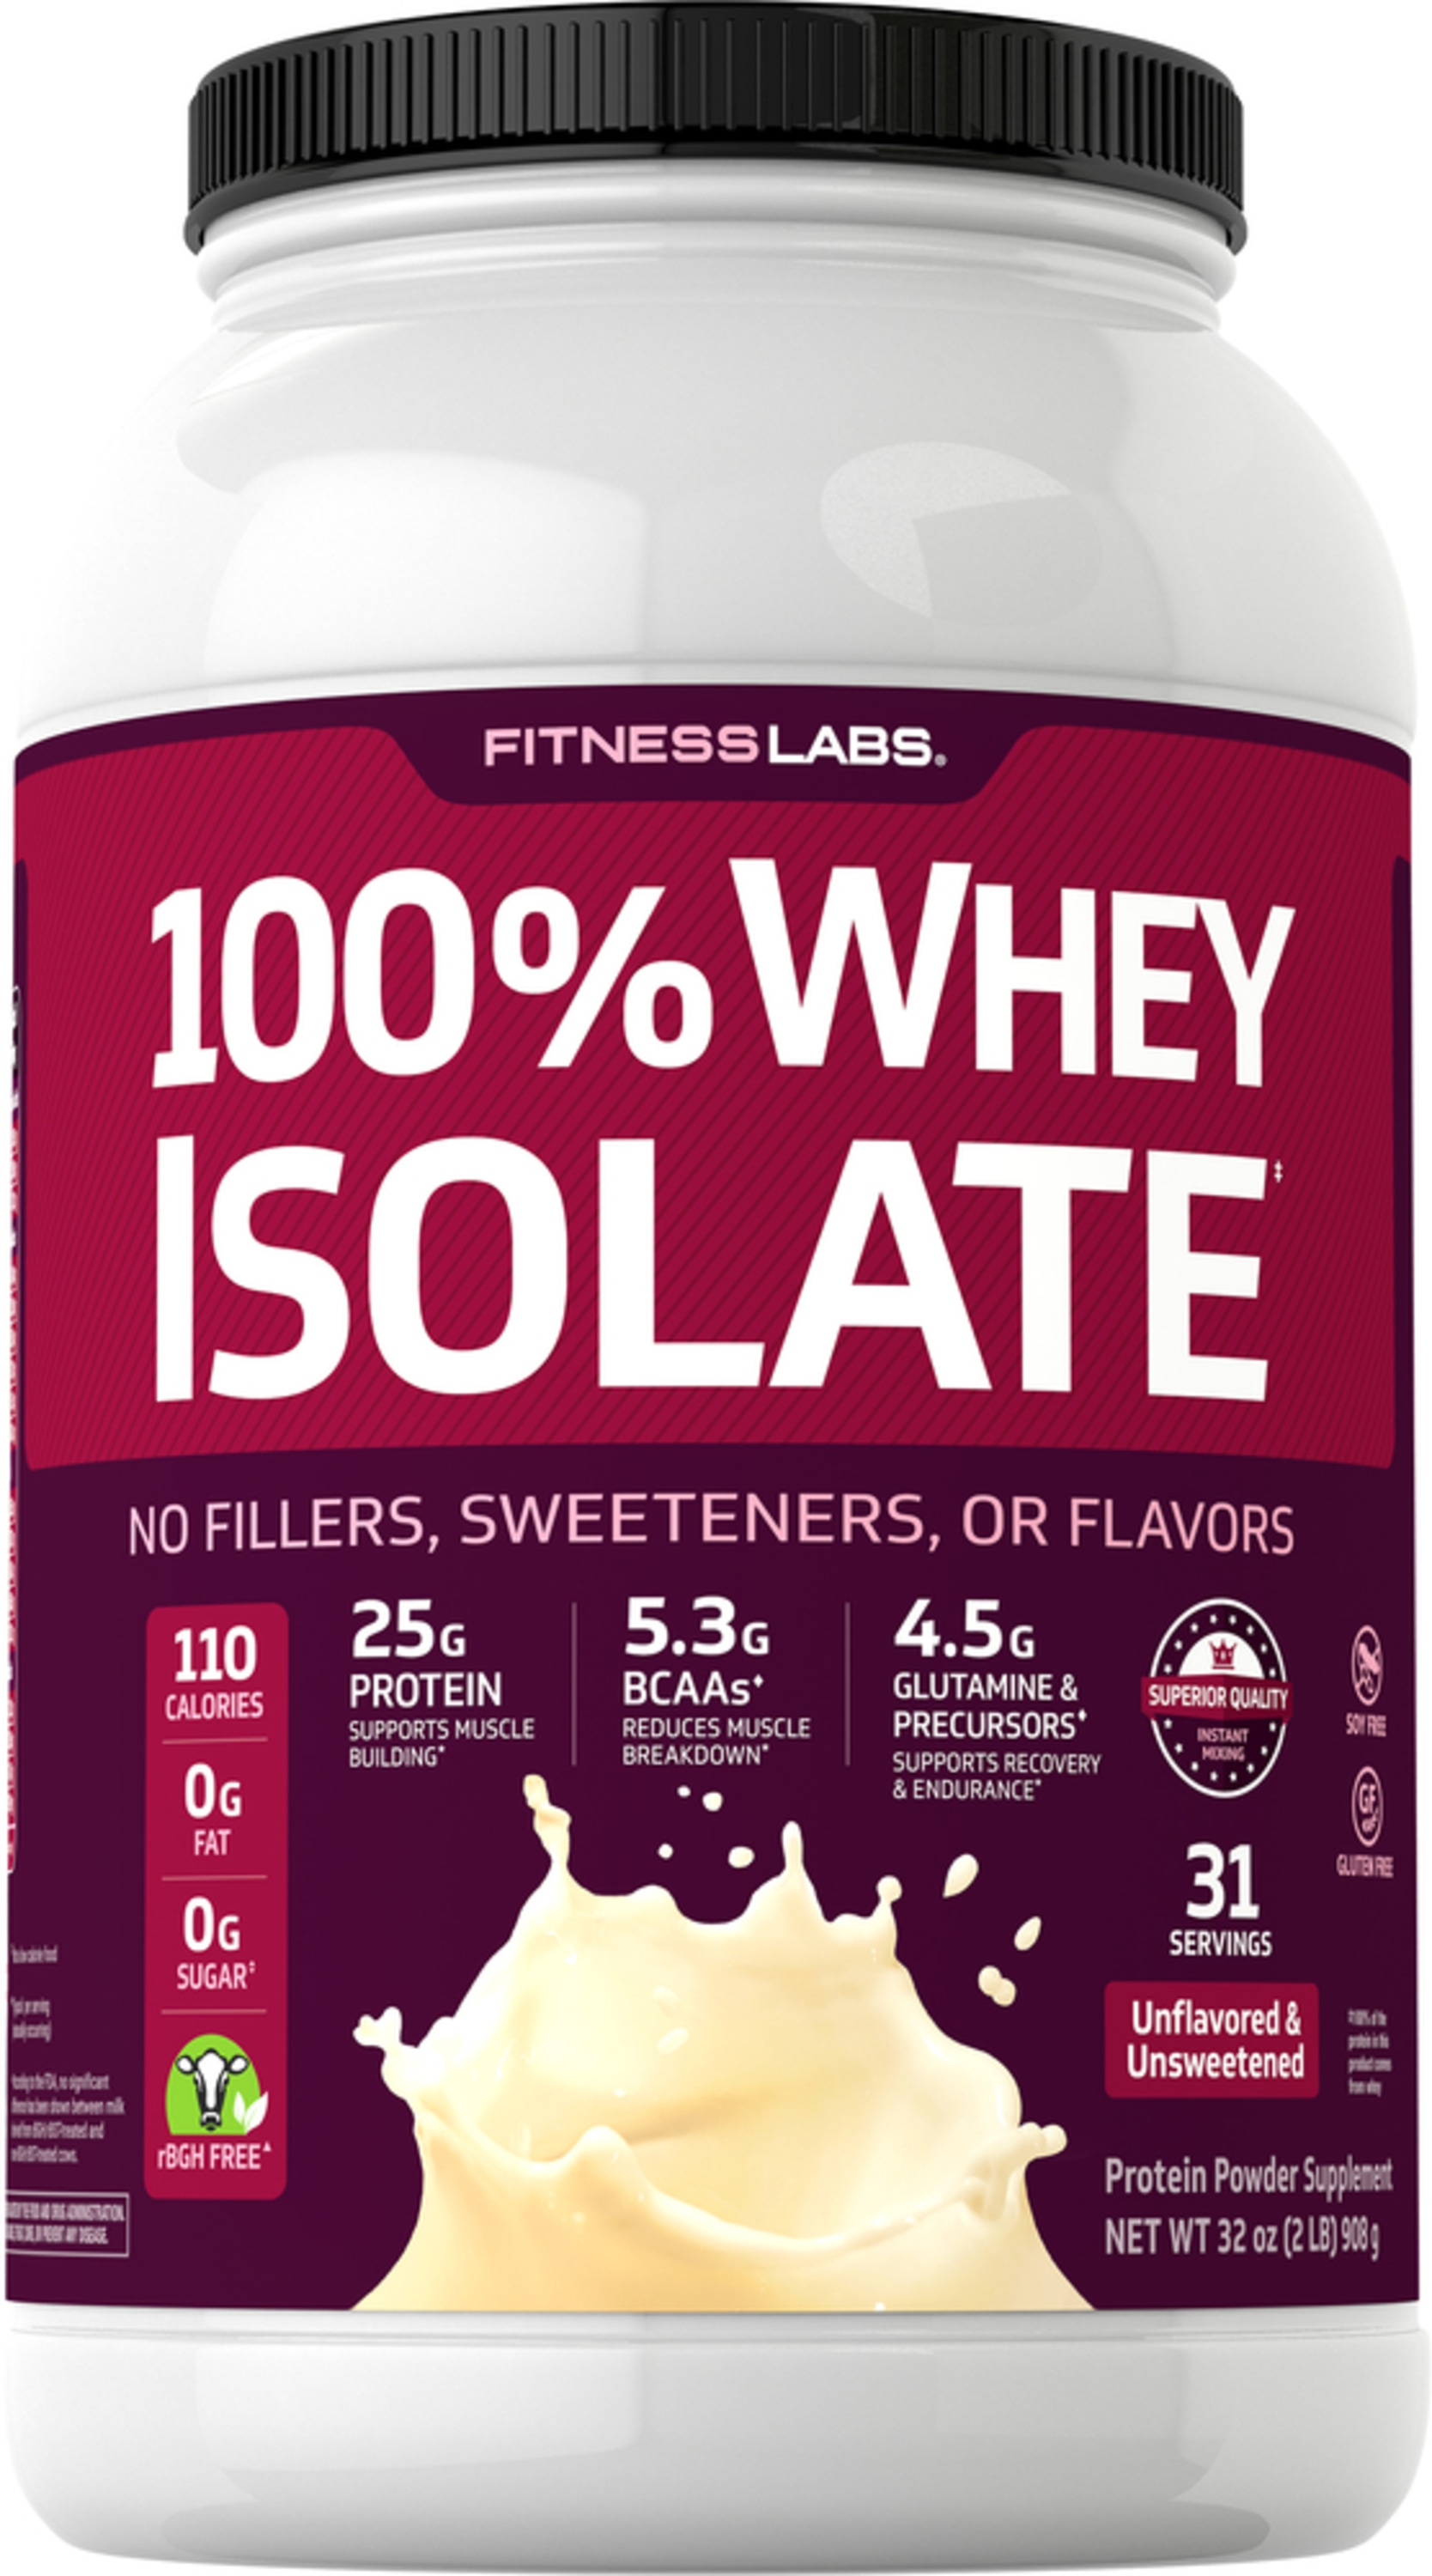 https://cdn2.pipingrock.com/images/product/amazon/product/whey-protein-isolate-unflavored-unsweetened-2-lb-908-g-bottle-20450.jpg?tx=w_3000,h_3000,c_fit&v=3